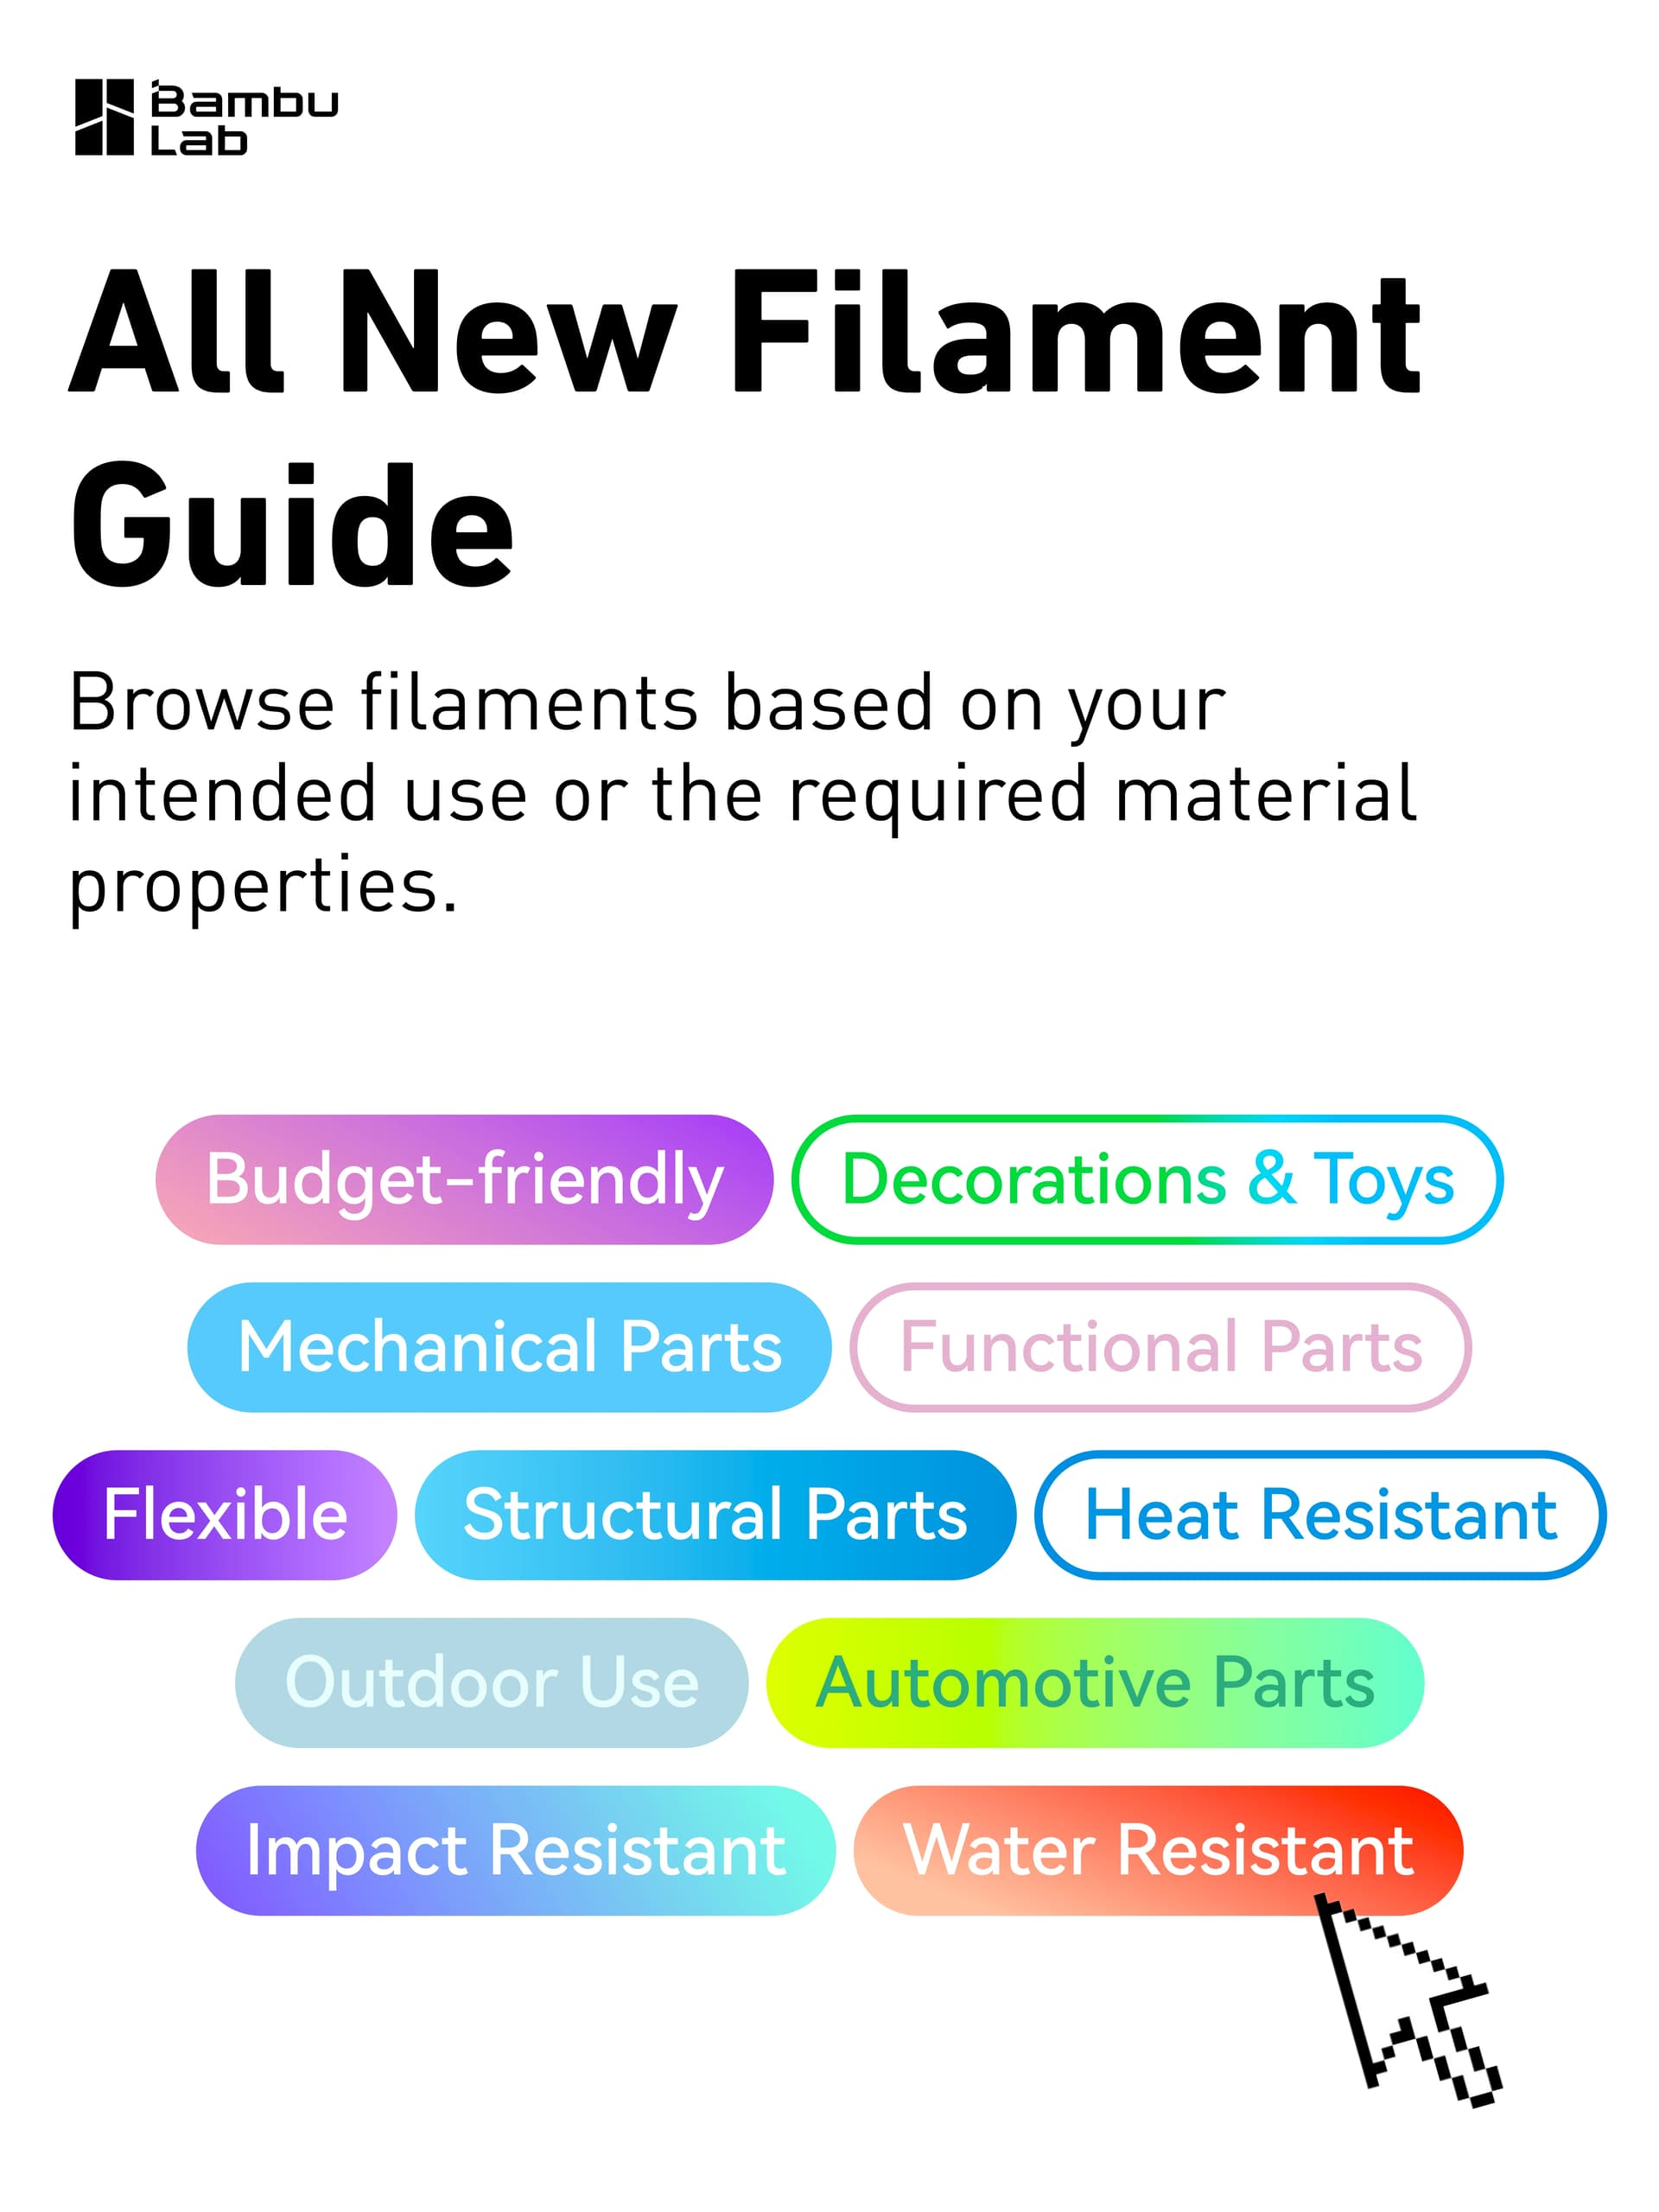 A picture showing different type of filament usage with the text: "All New Filament Guide. Browse filaments based on your intended use or the required material properties"